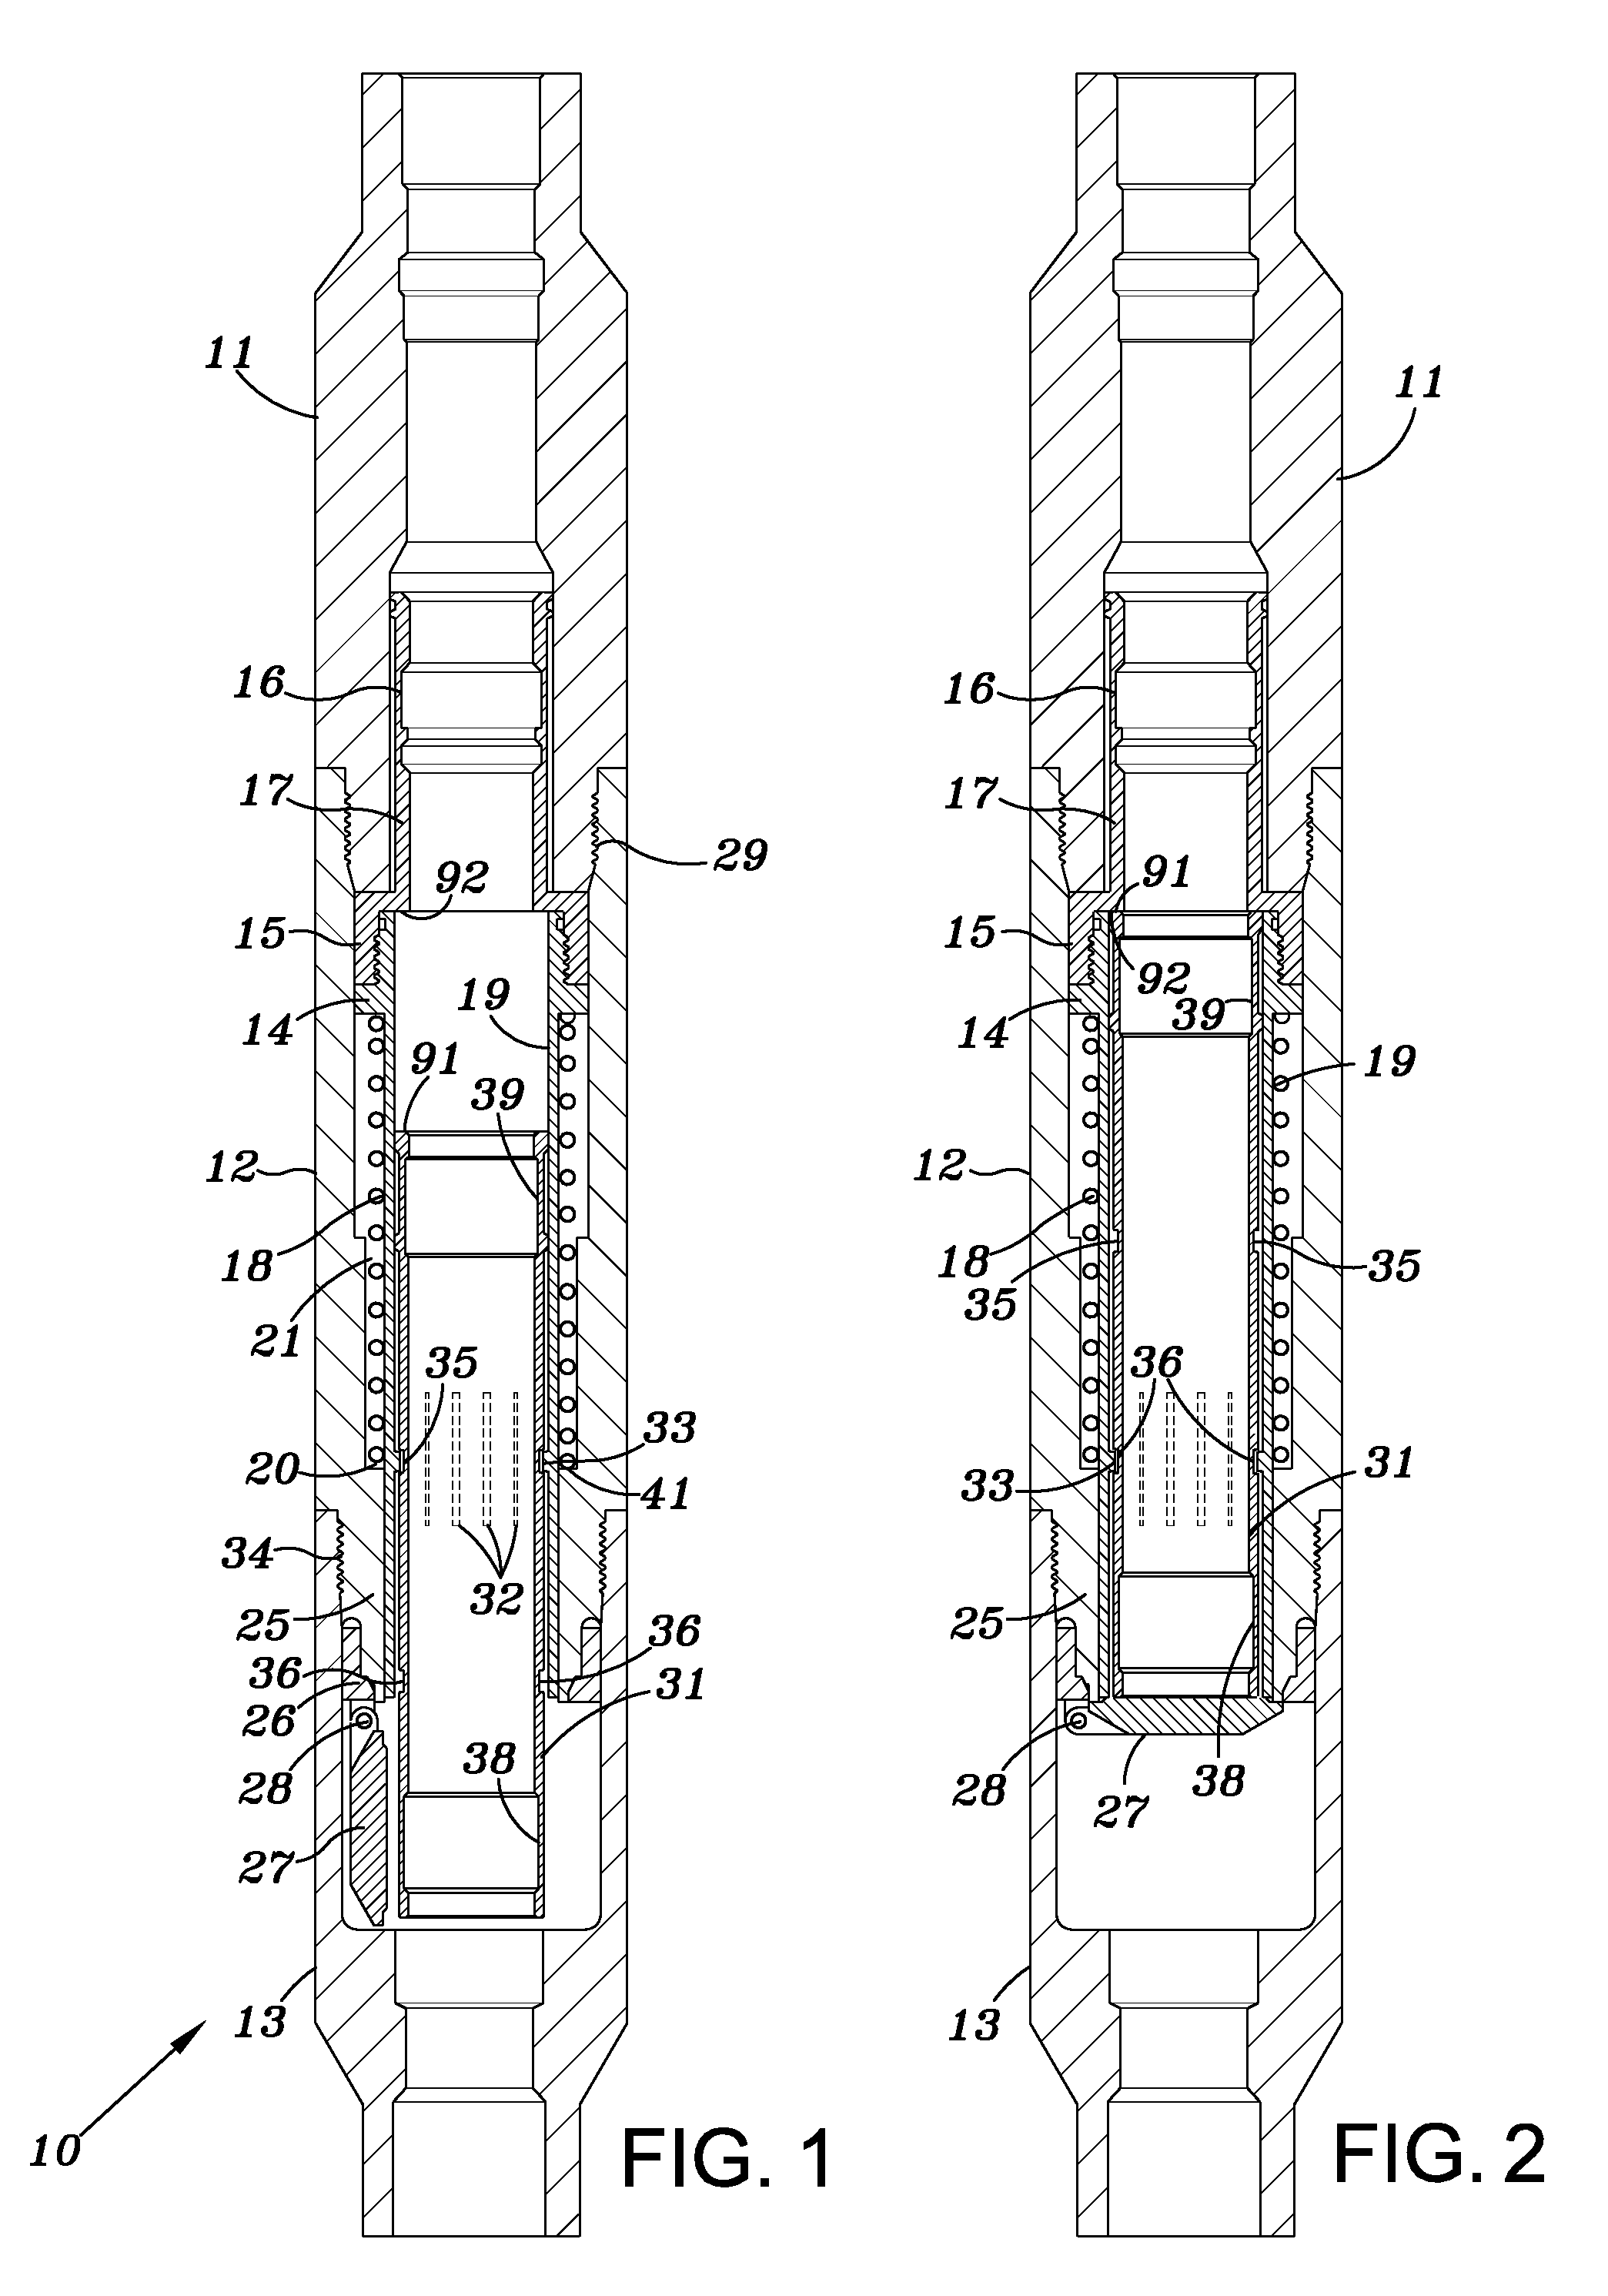 Tubing retrievable injection valve assembly